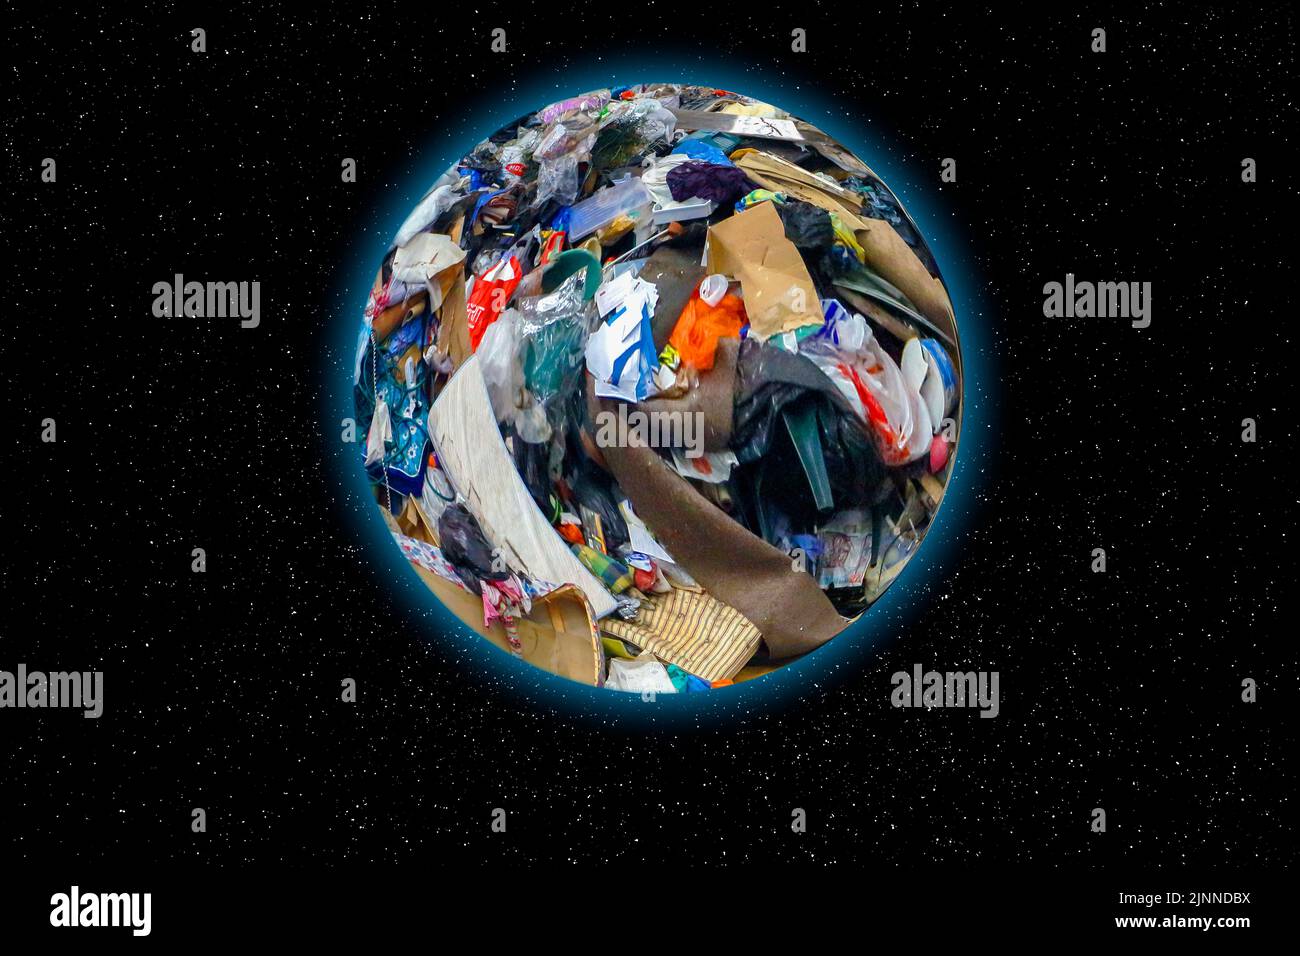 Earth made of garbage, composite image Stock Photo